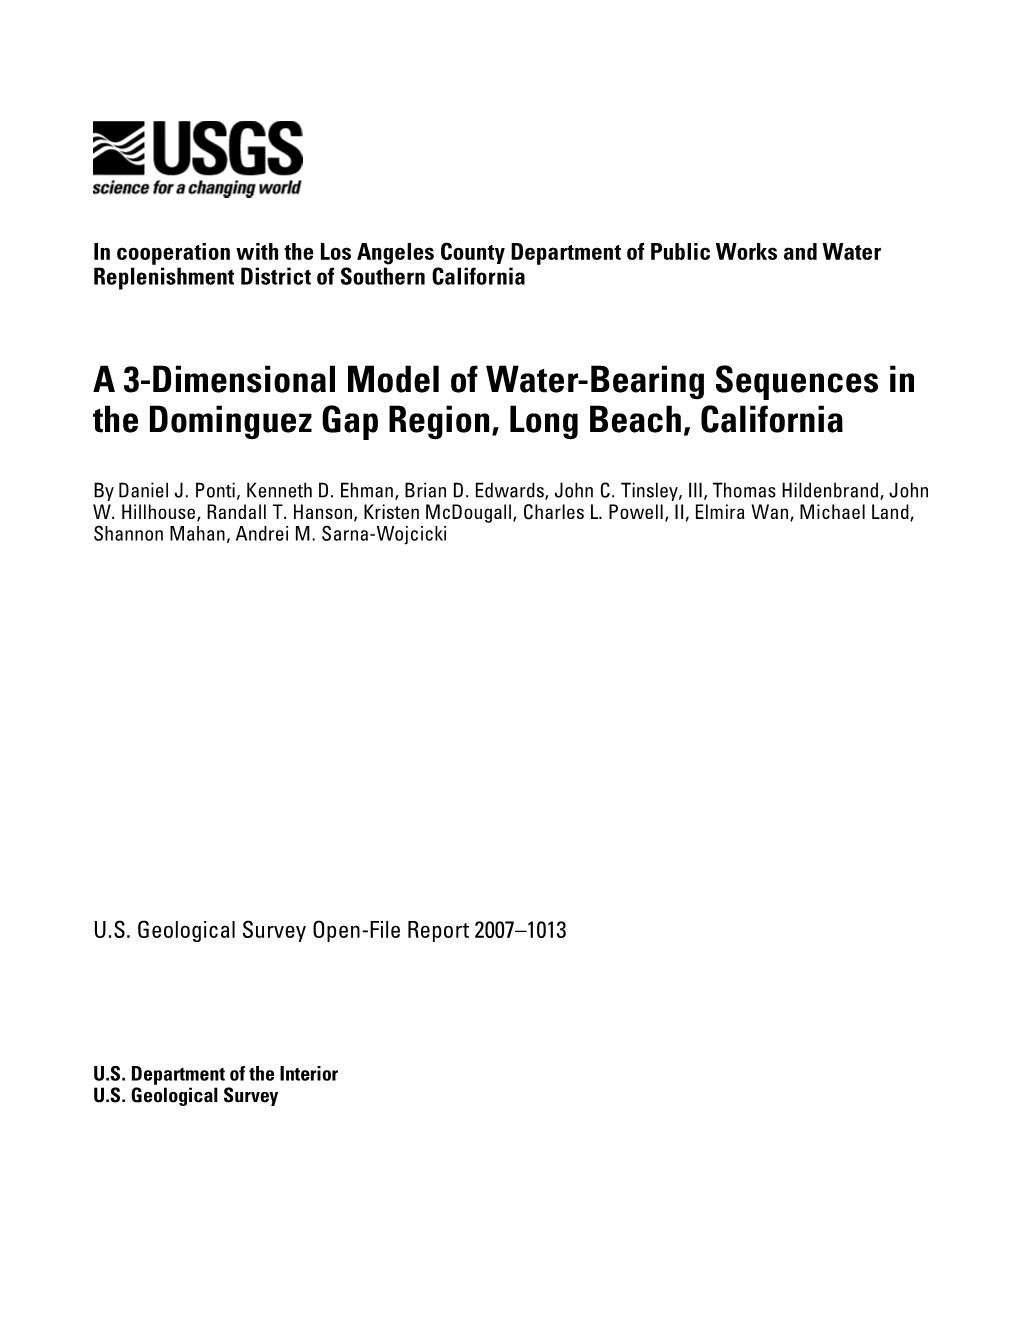 A 3-Dimensional Model of Water-Bearing Sequences in the Dominguez Gap Region, Long Beach, California